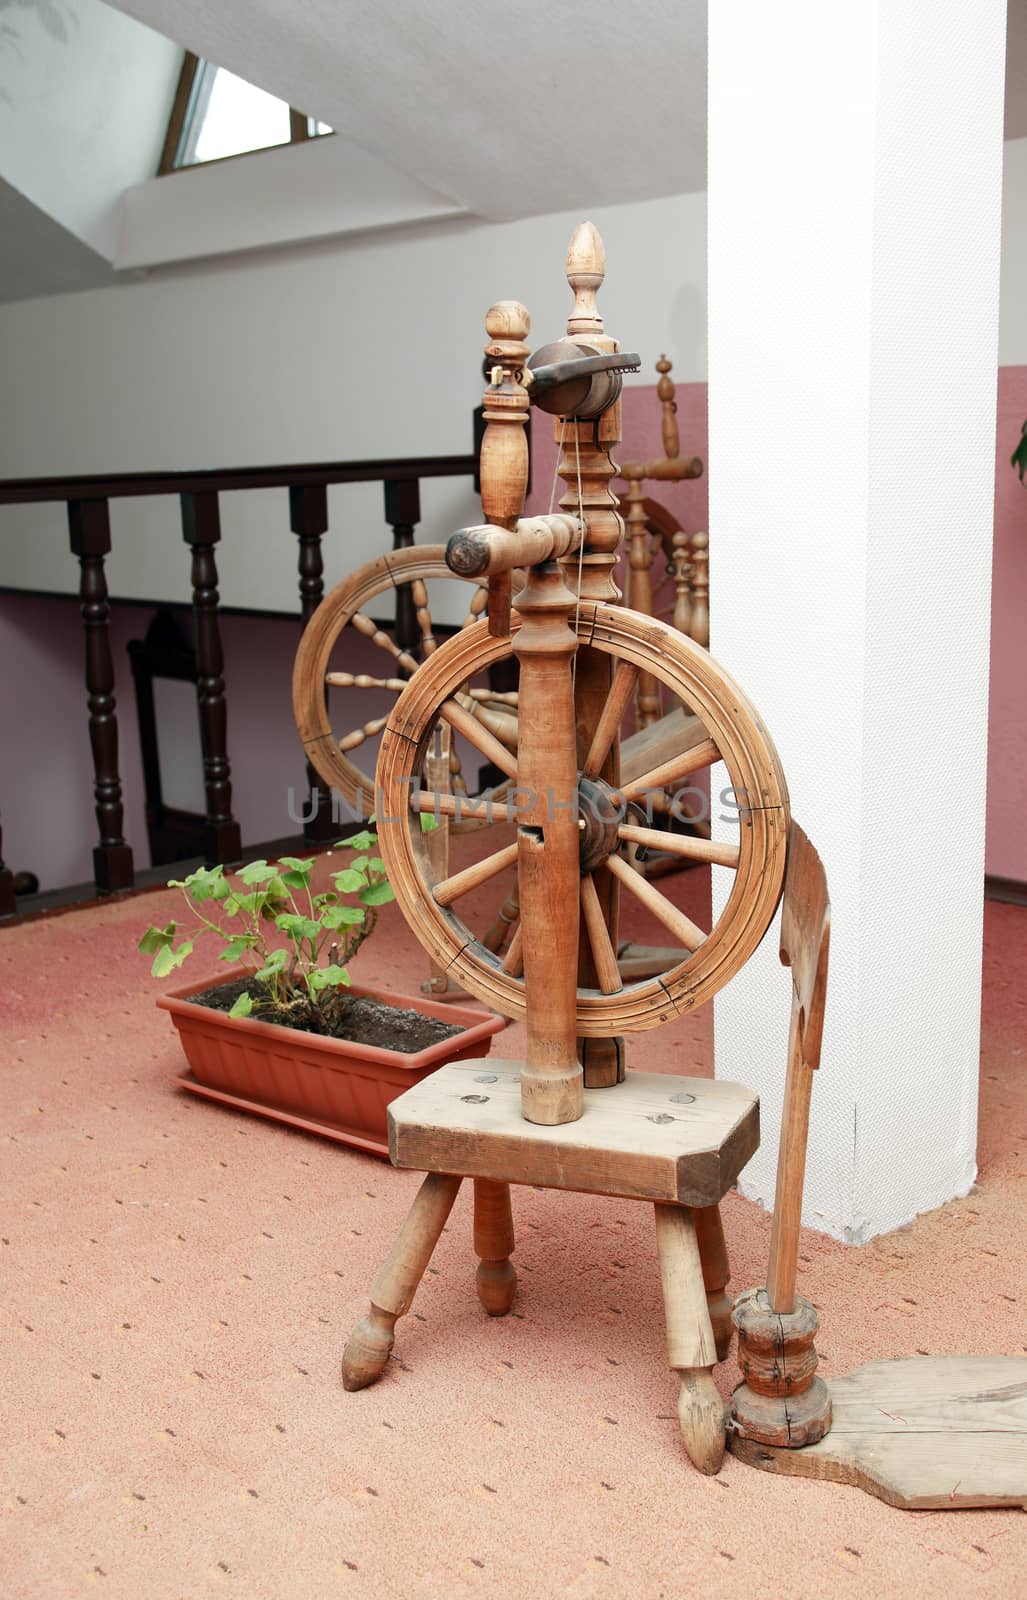 Nice ancient wooden spinning wheel in home interior